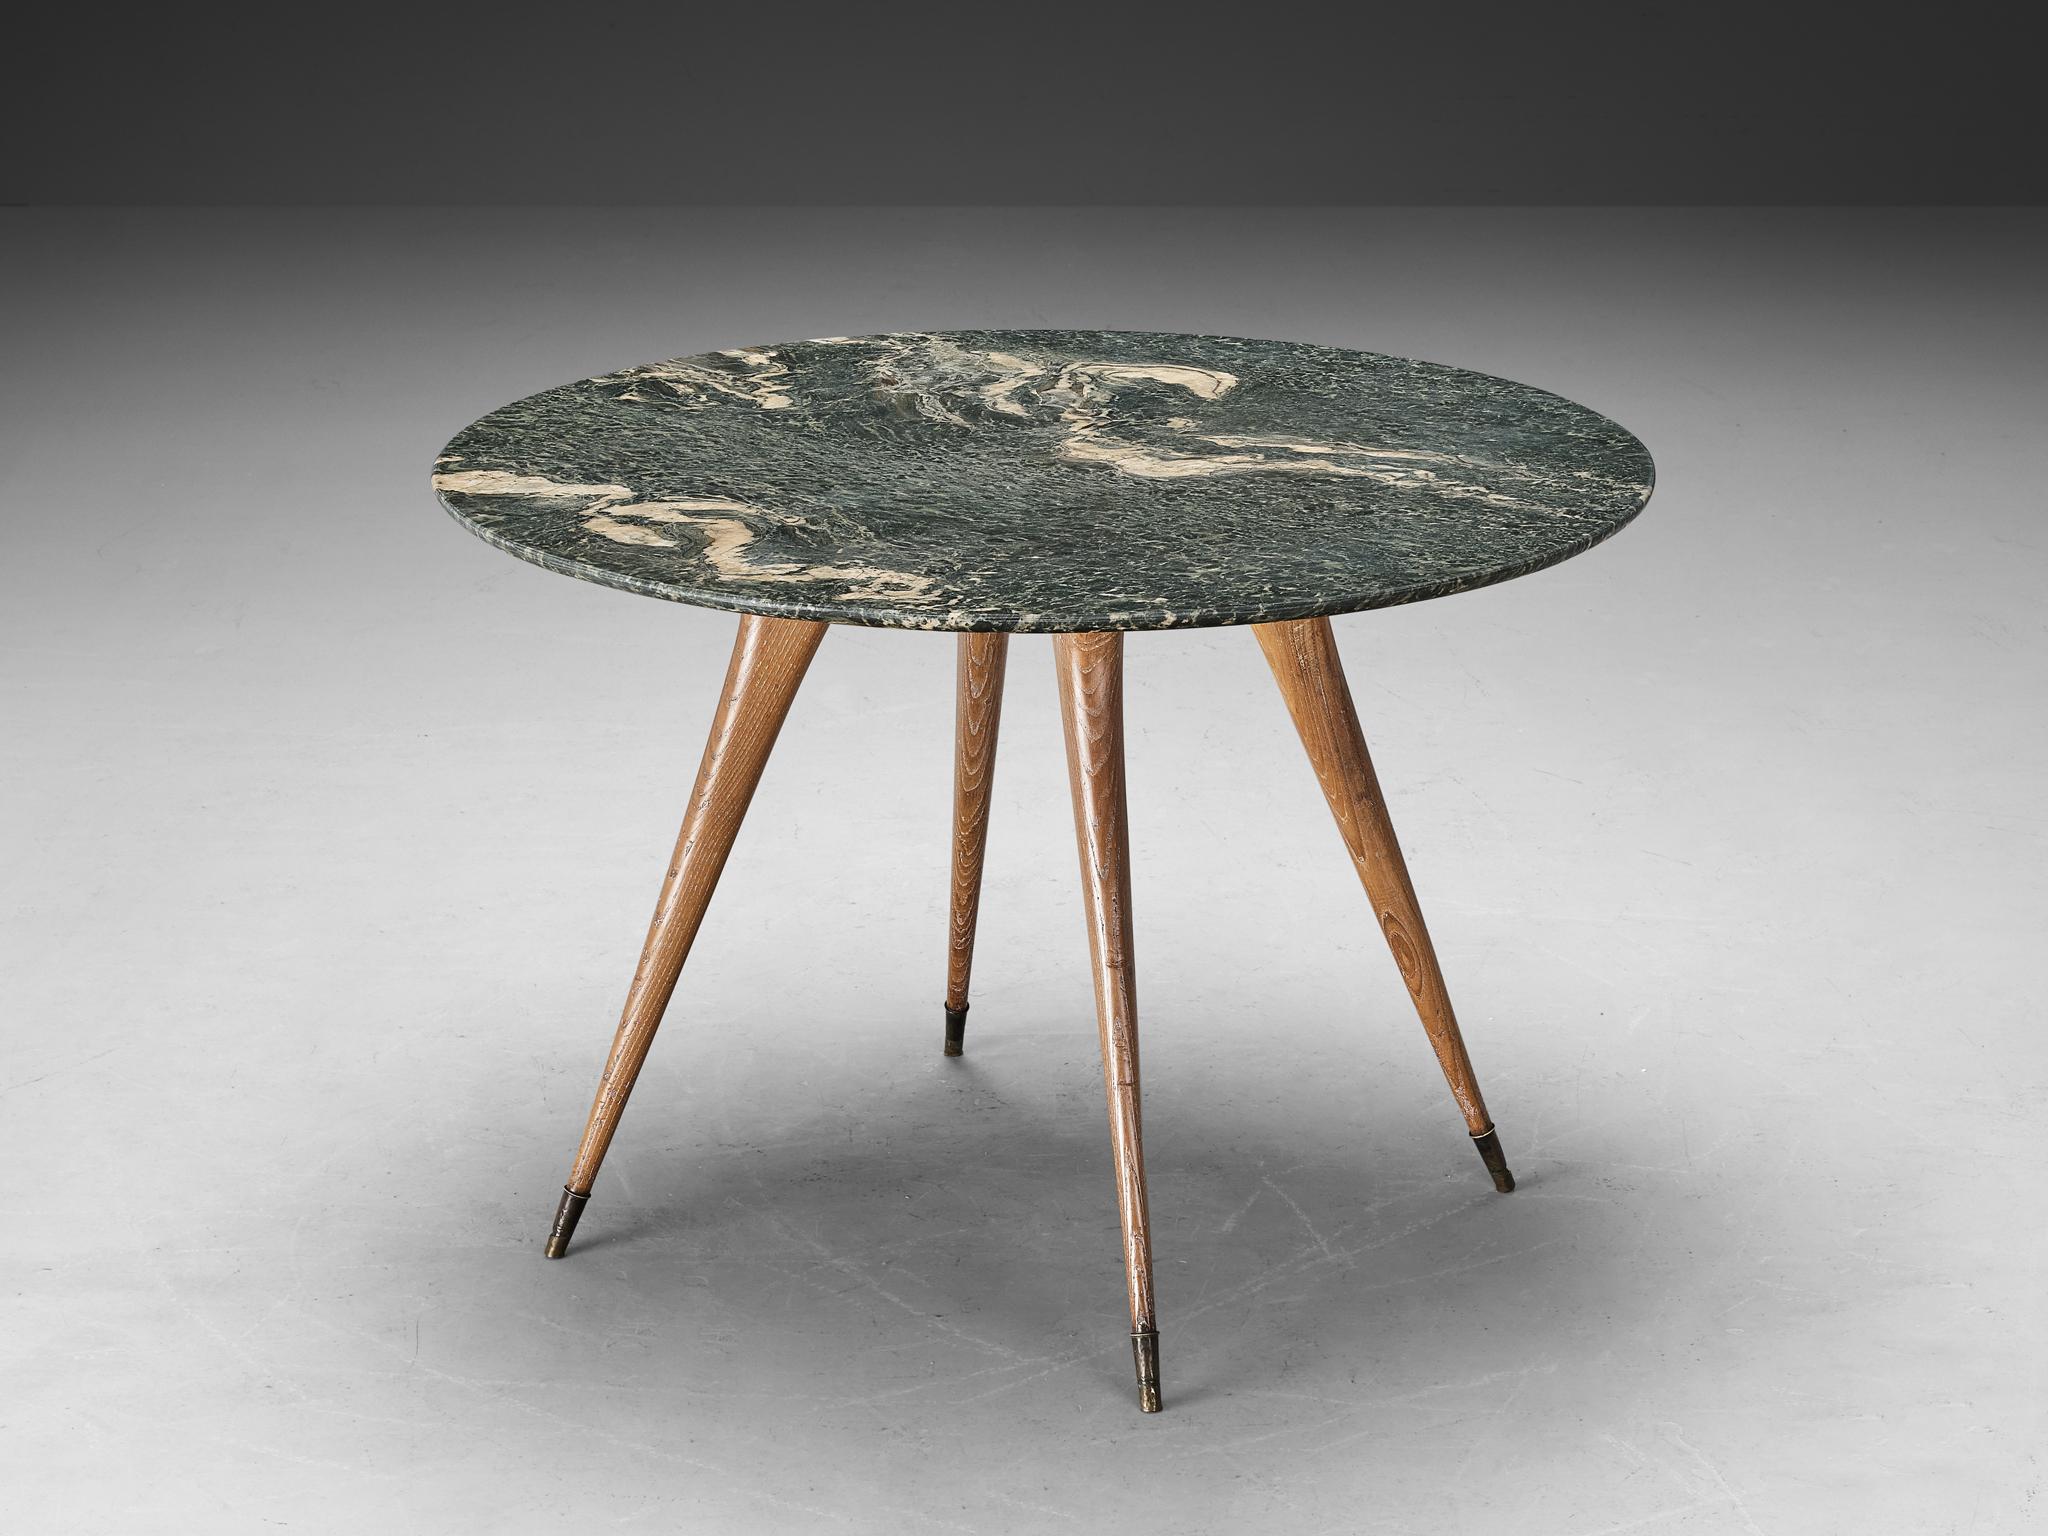 Dining table, marble, cerused chestnut, brass, Italy, 1940s

A charming dining table of Italian origin and dating back to the 1940s, encapsulates the Art Deco flair of that period. The top is truly gorgeous, featuring a large round green marble slab